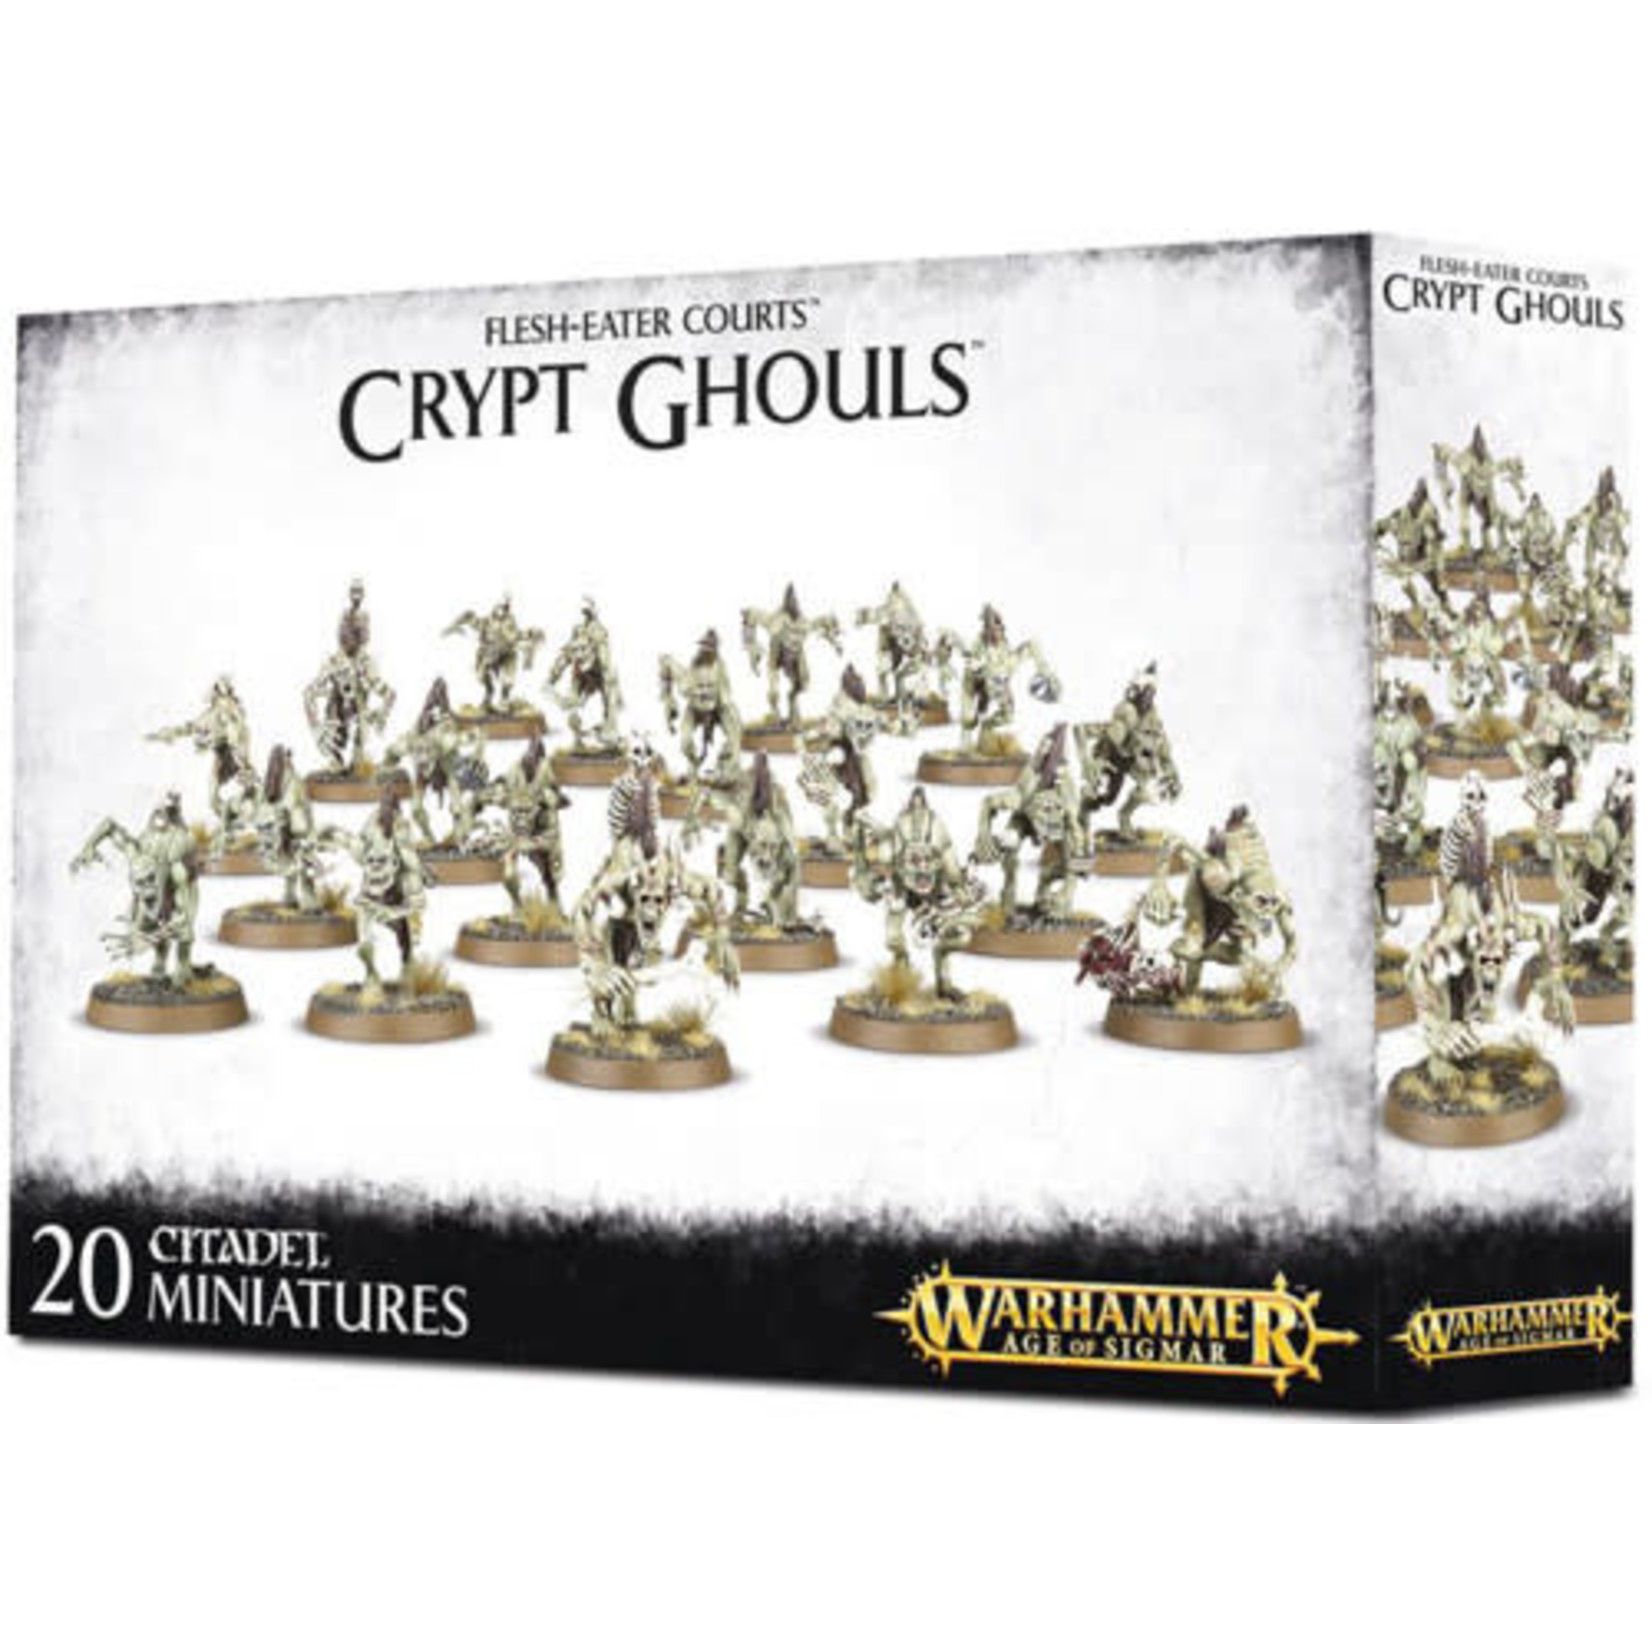 Flesh-Eater Court Crypt Ghouls Old (AOS)